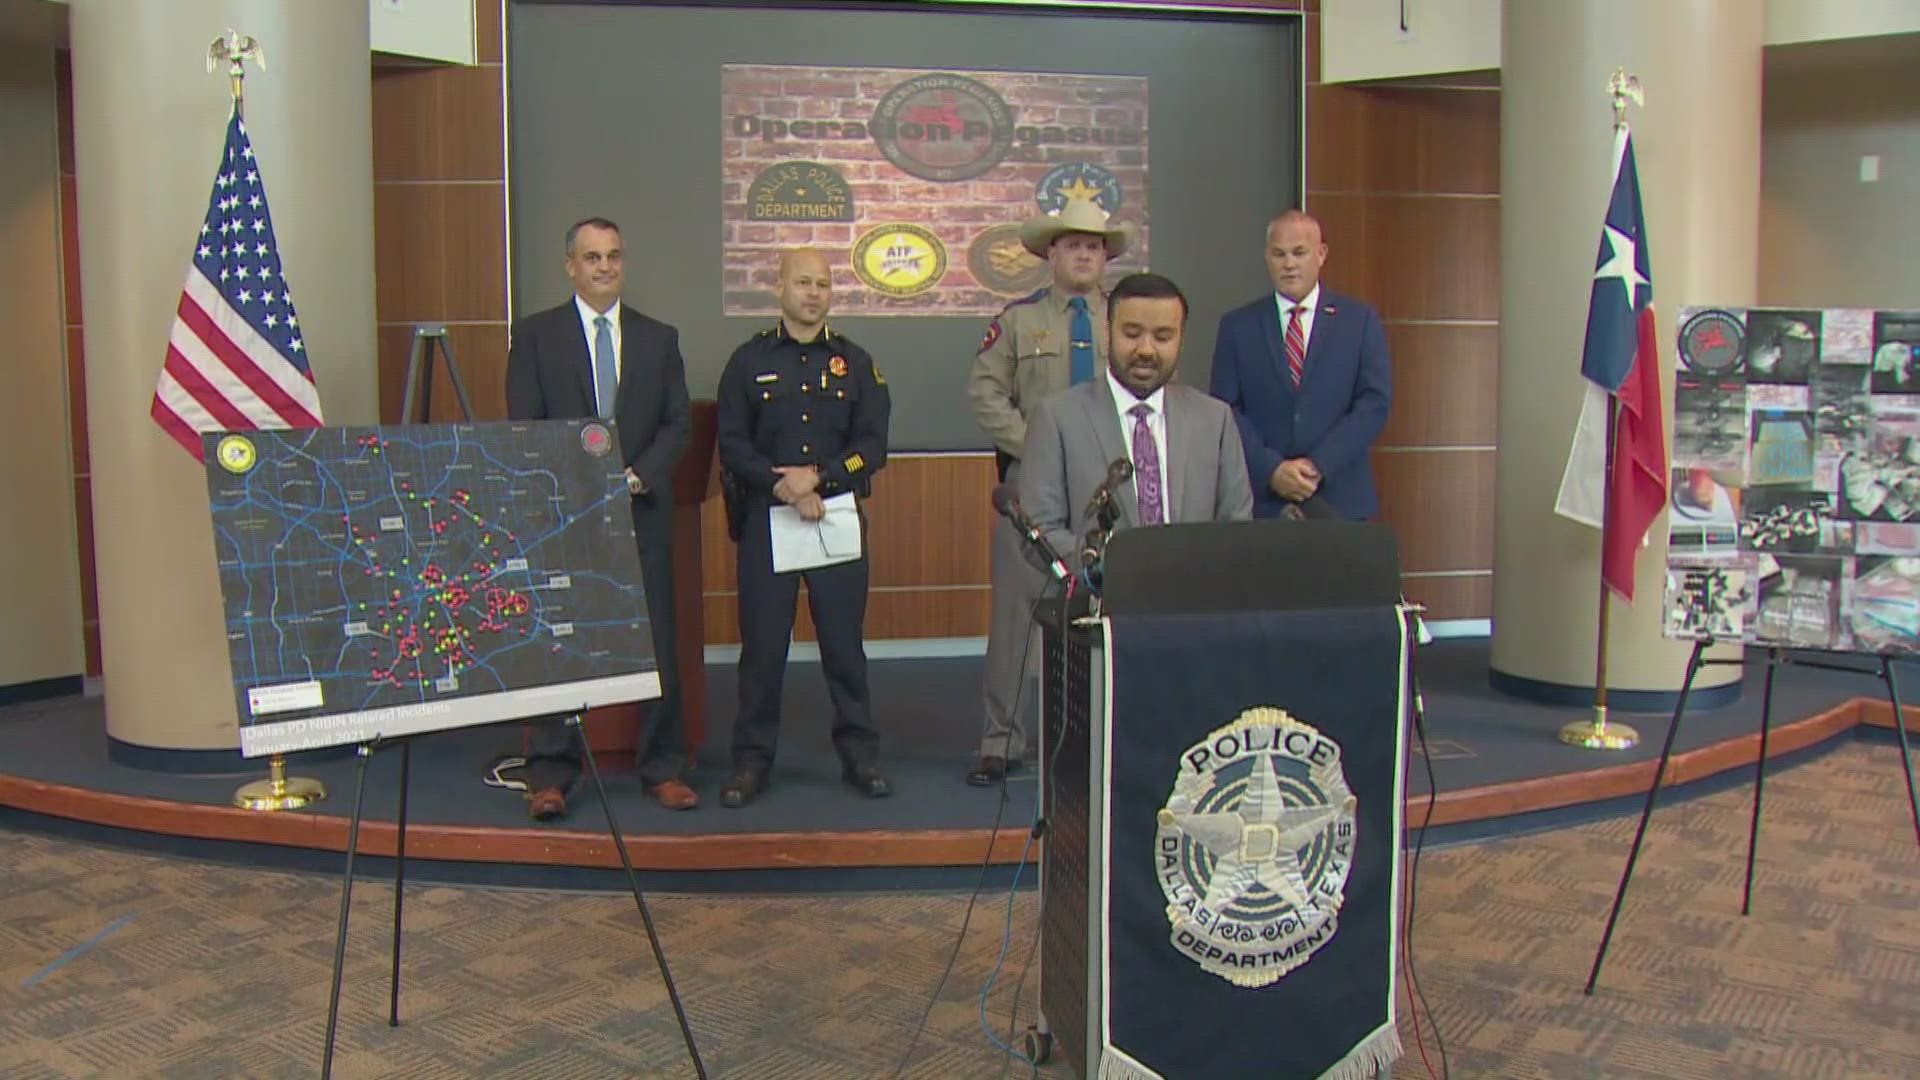 The Dallas Police Department and federal partners announced the results of an operation focused on addressing gun violence in southeast Dallas.